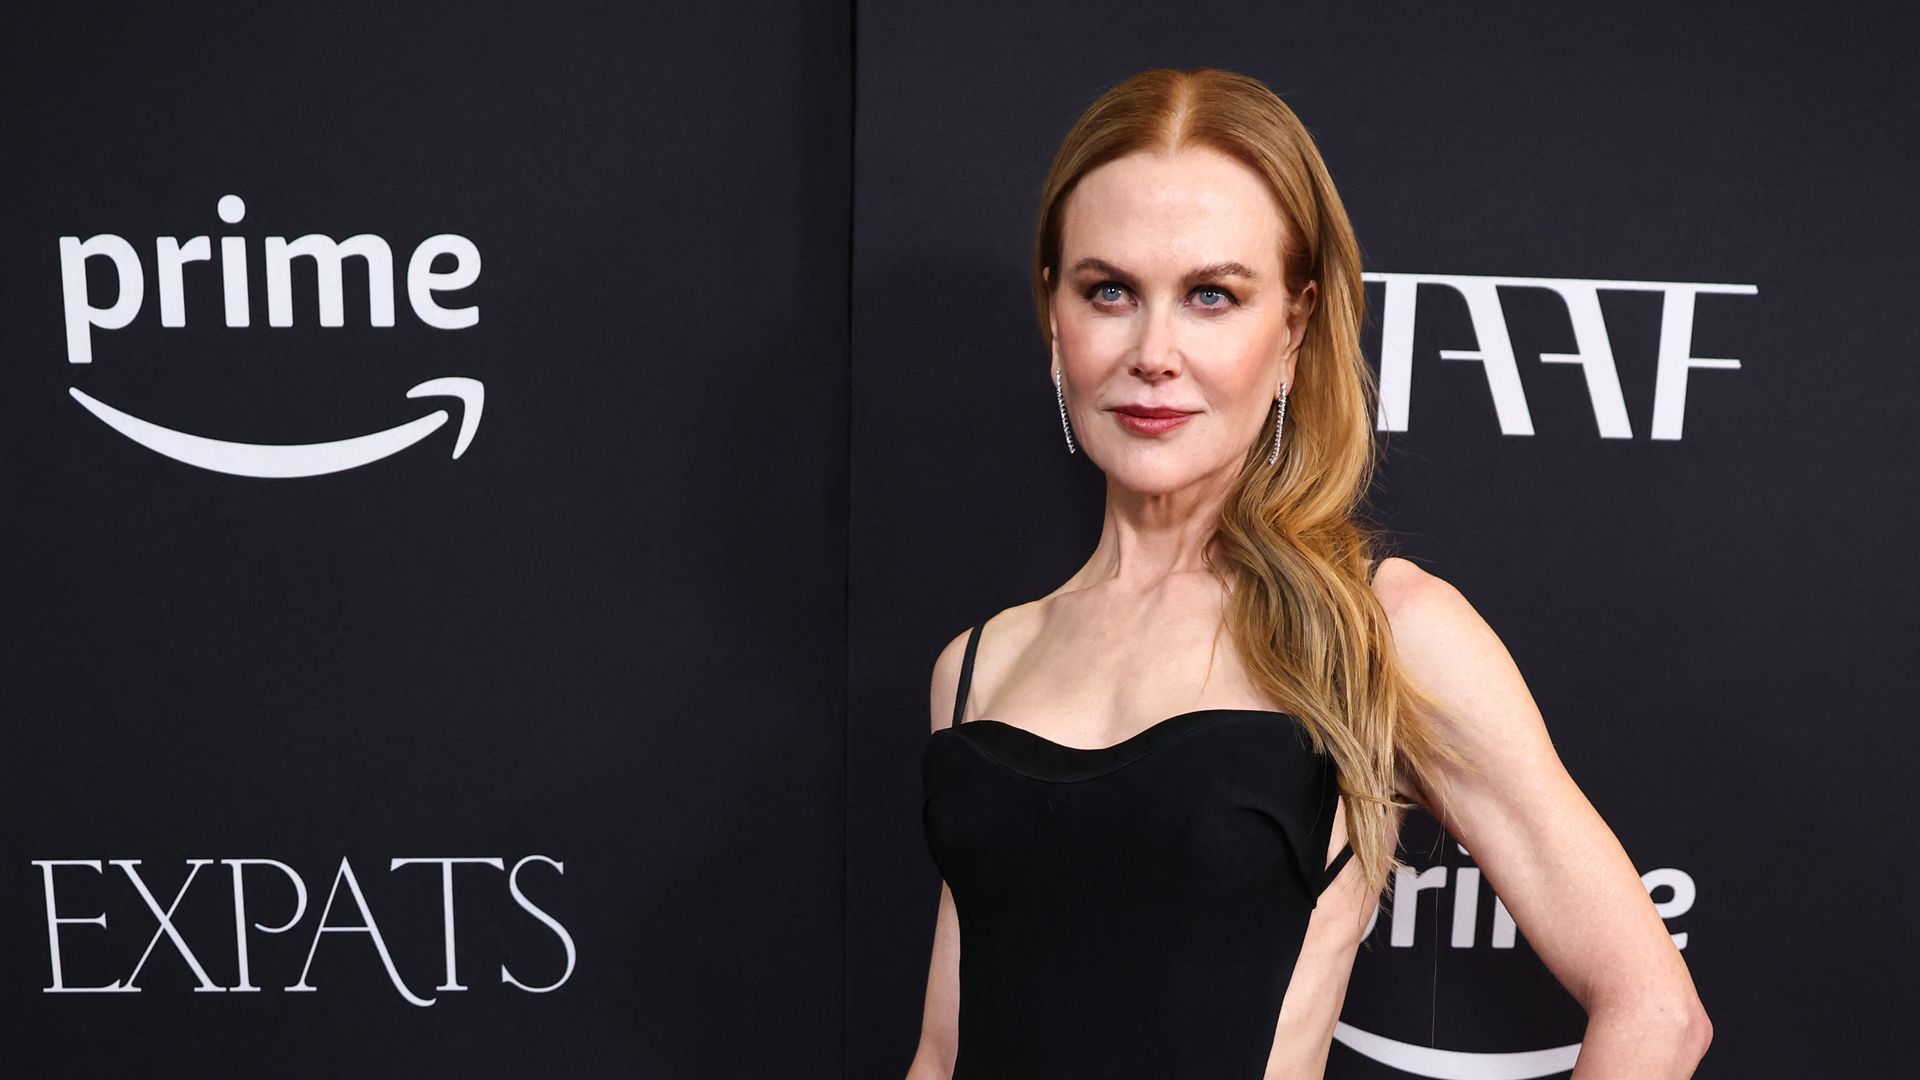 Nicole Kidman arrives for Prime Video's Expats premiere at The Museum of Modern Art in New York City 